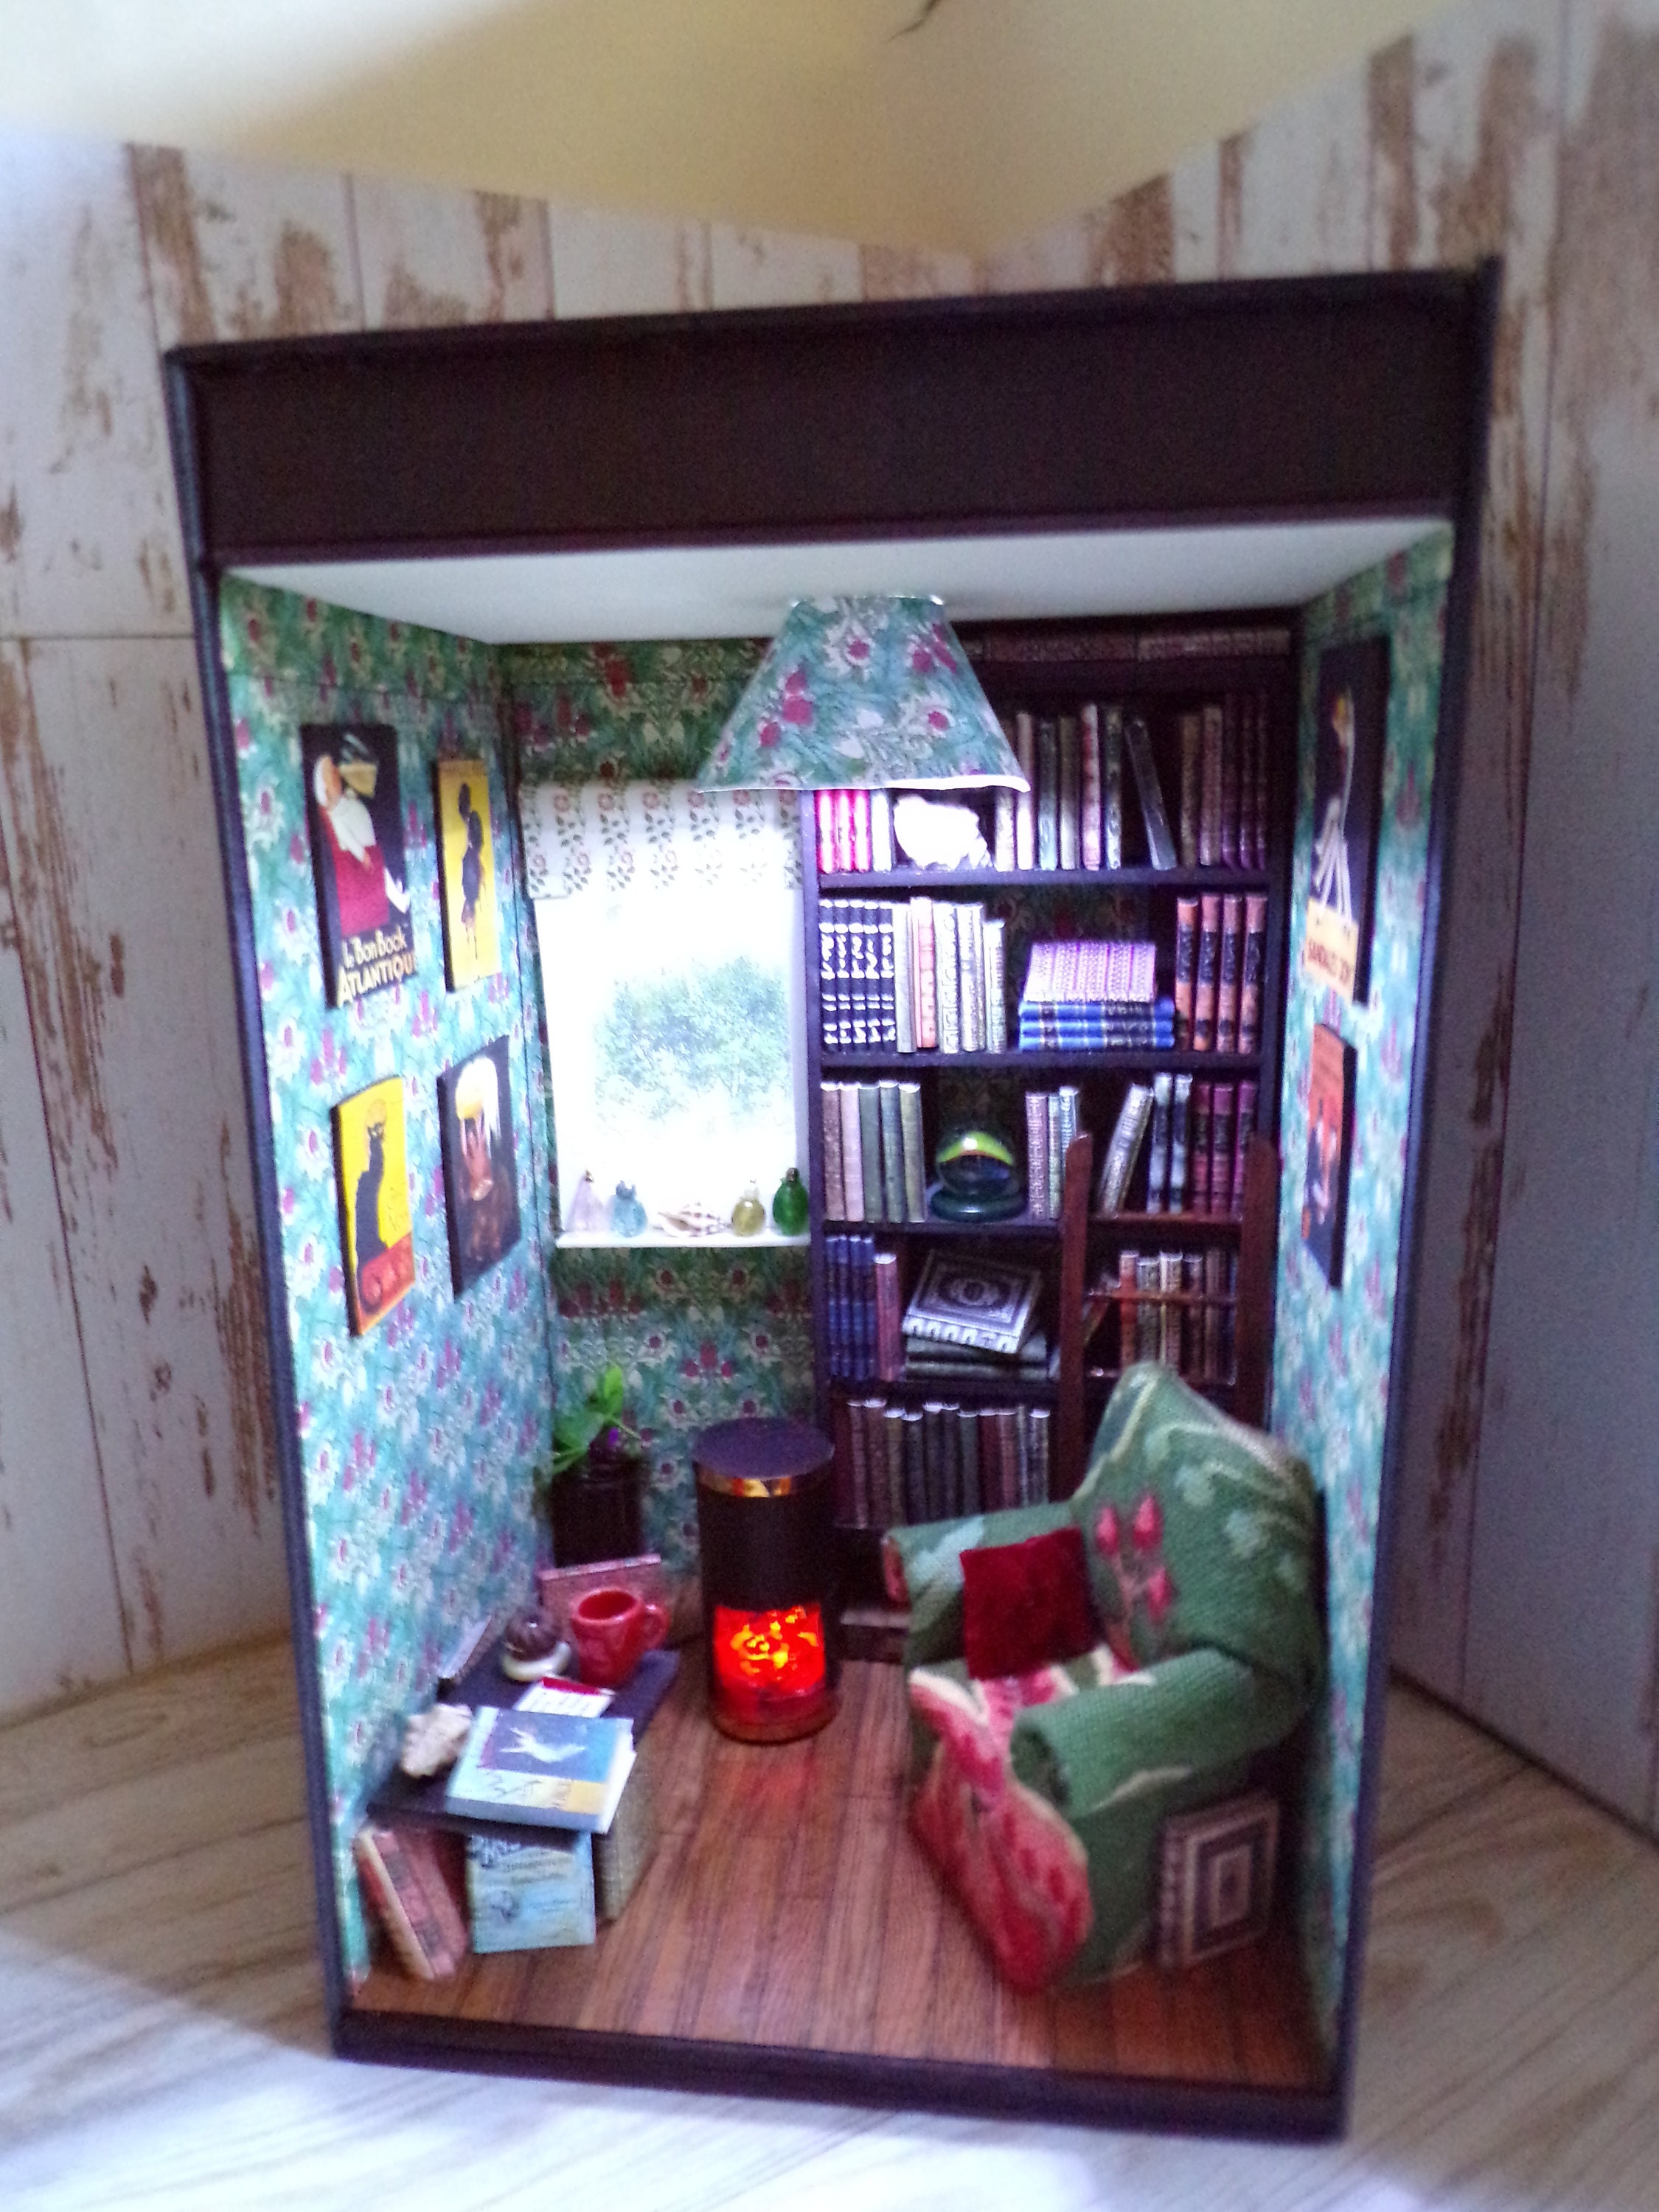 Booknook, Book Nook, Diorama. Book Alley Shelf Insert, Book Lover Gift,  Library Room, Heaps of Books, Cosy Chair. -  Sweden